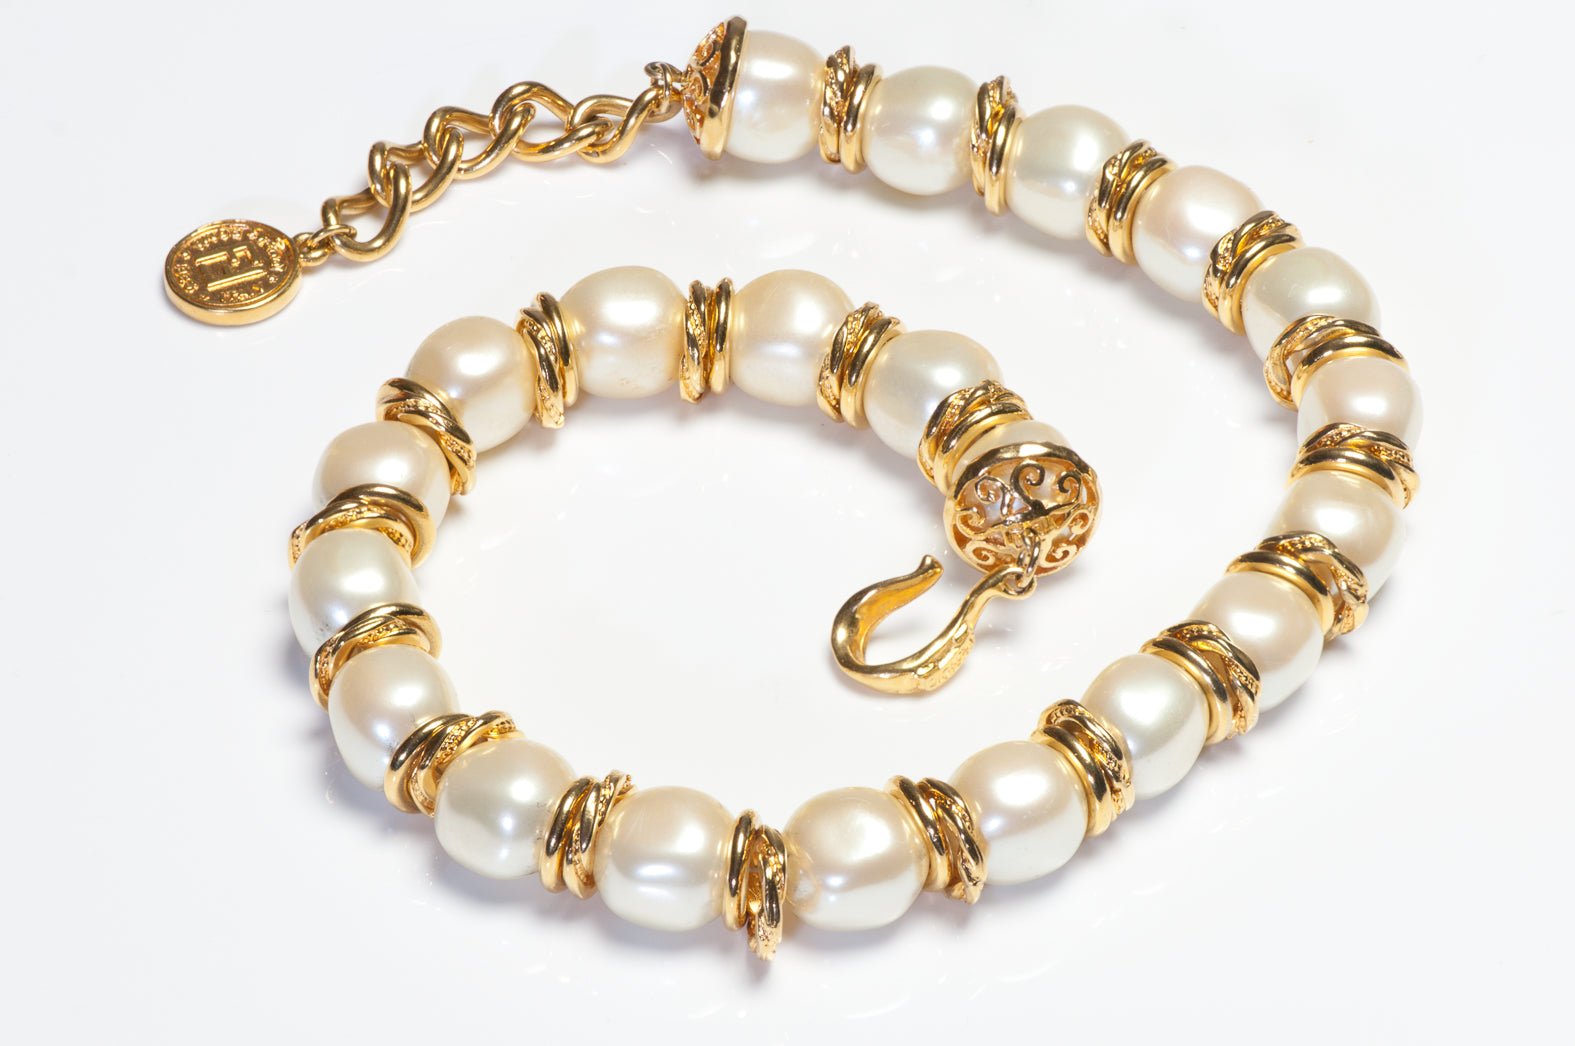 Vintage 1990’s Fendi Gold Plated Faux Pearl Beads Collar Necklace